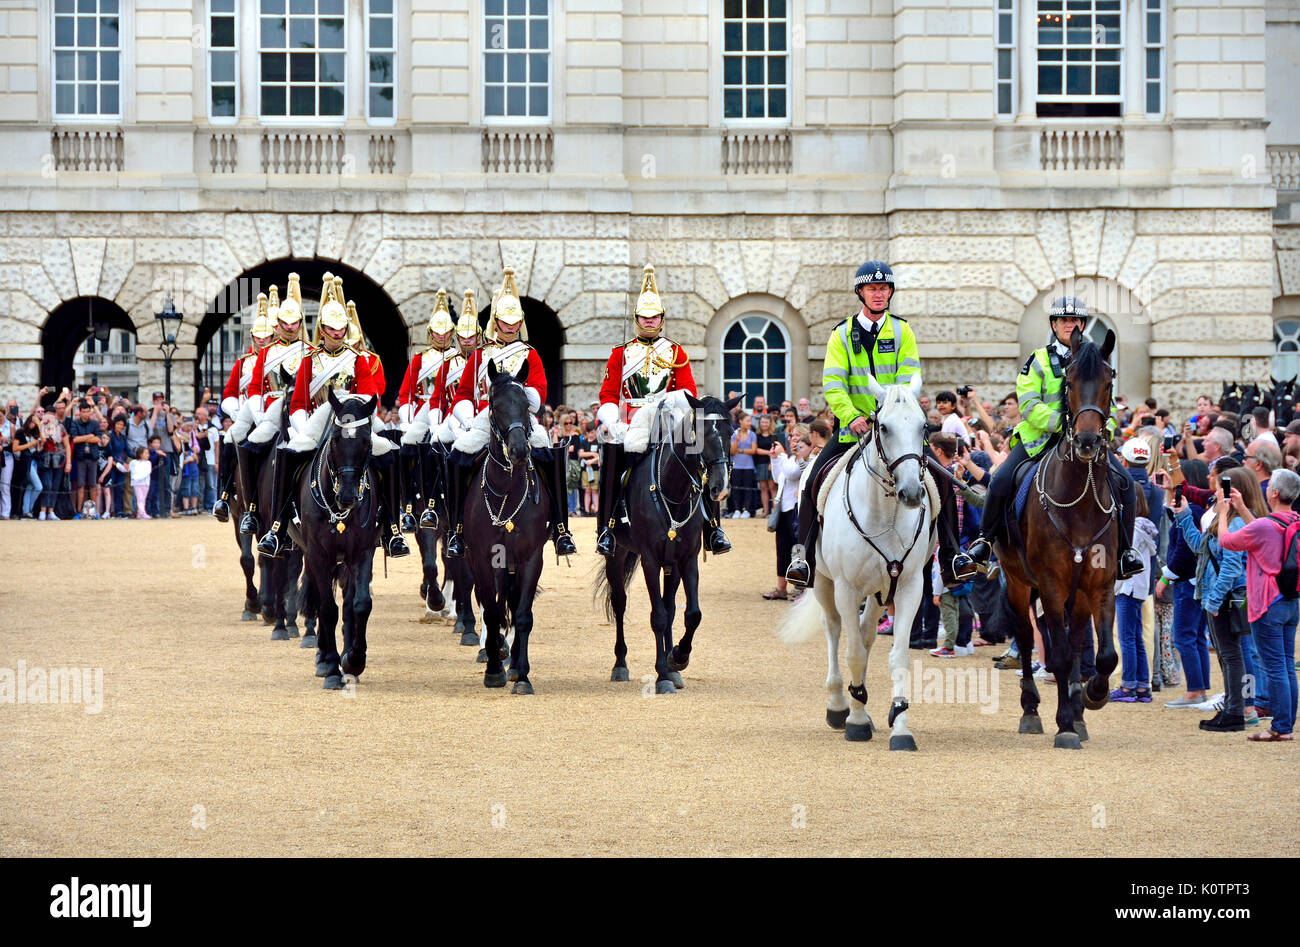 London, England, UK. Life Guards, part of the Household Cavalry, changing the guard on Horse Guards Parade, accompanied by mounted police Stock Photo